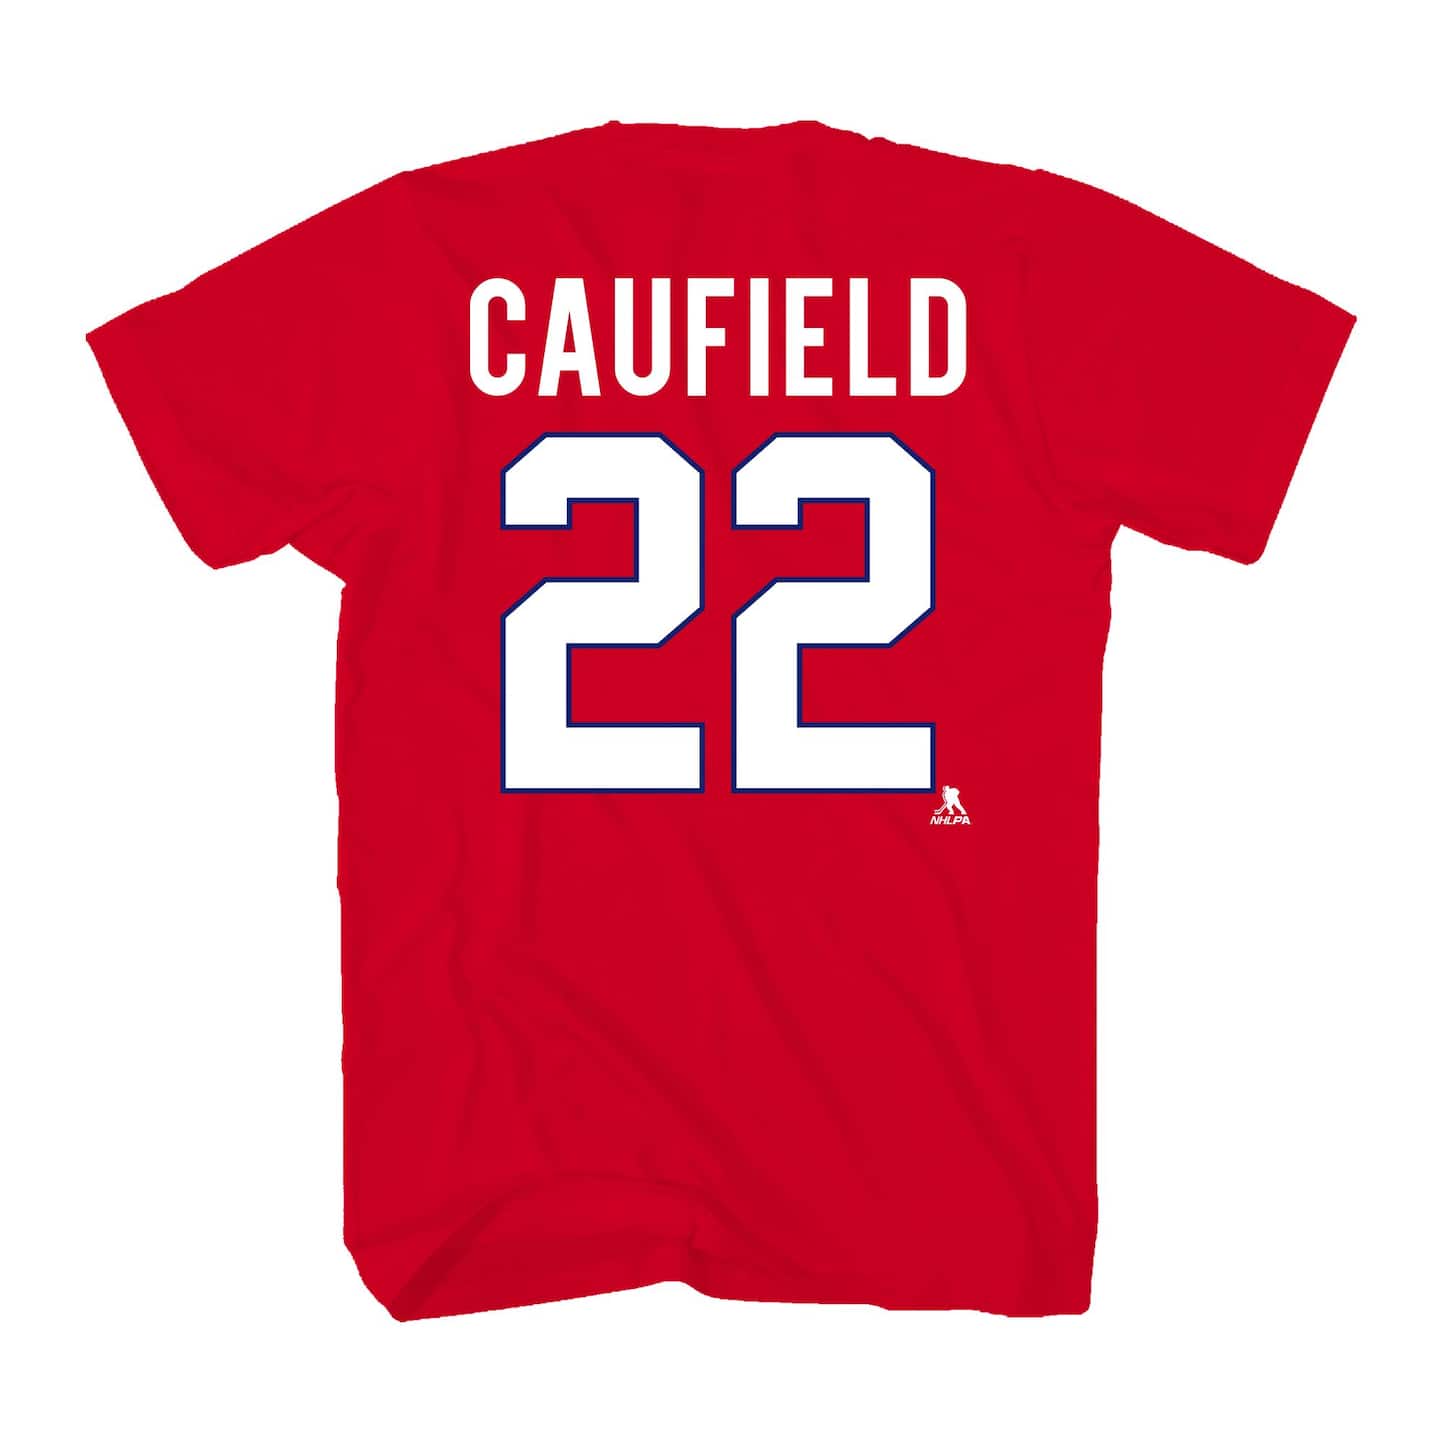 NHL Men's Montreal Canadiens Cole Caufield #22 Red T-Shirt, XXL